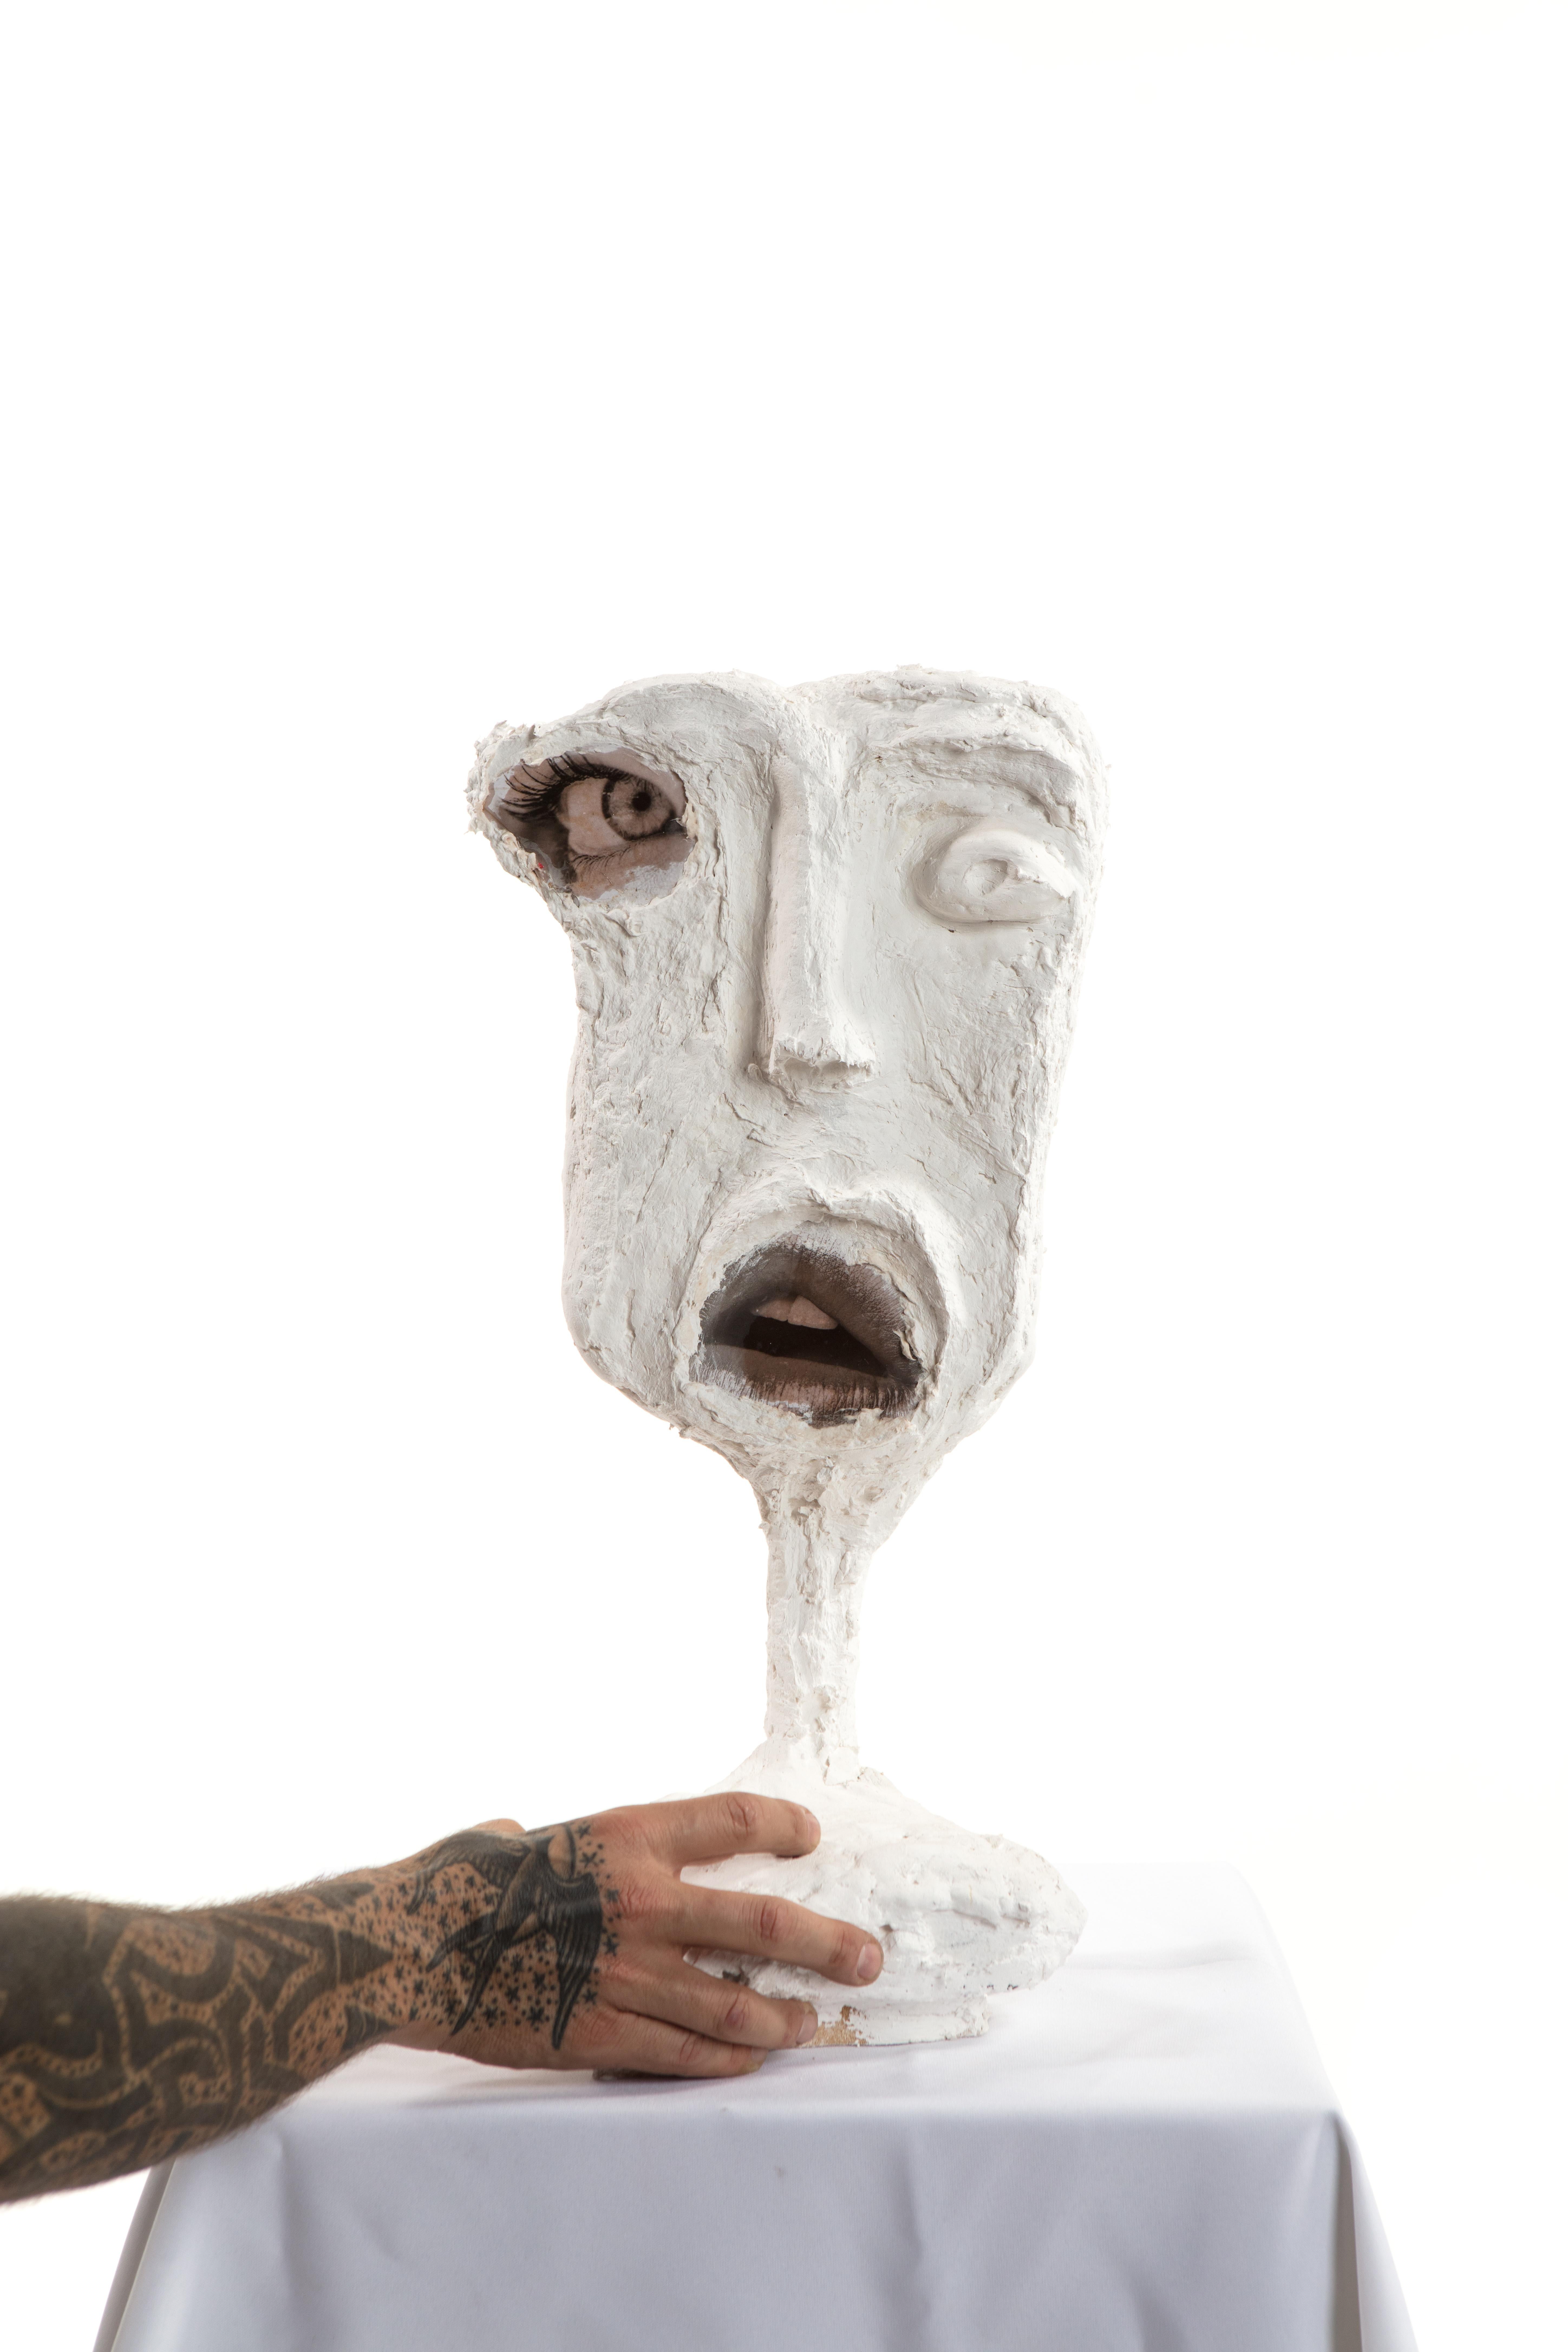 Hand-Crafted White Plaster Sculptural Figure Face, 21st Century by Mattia Biagi